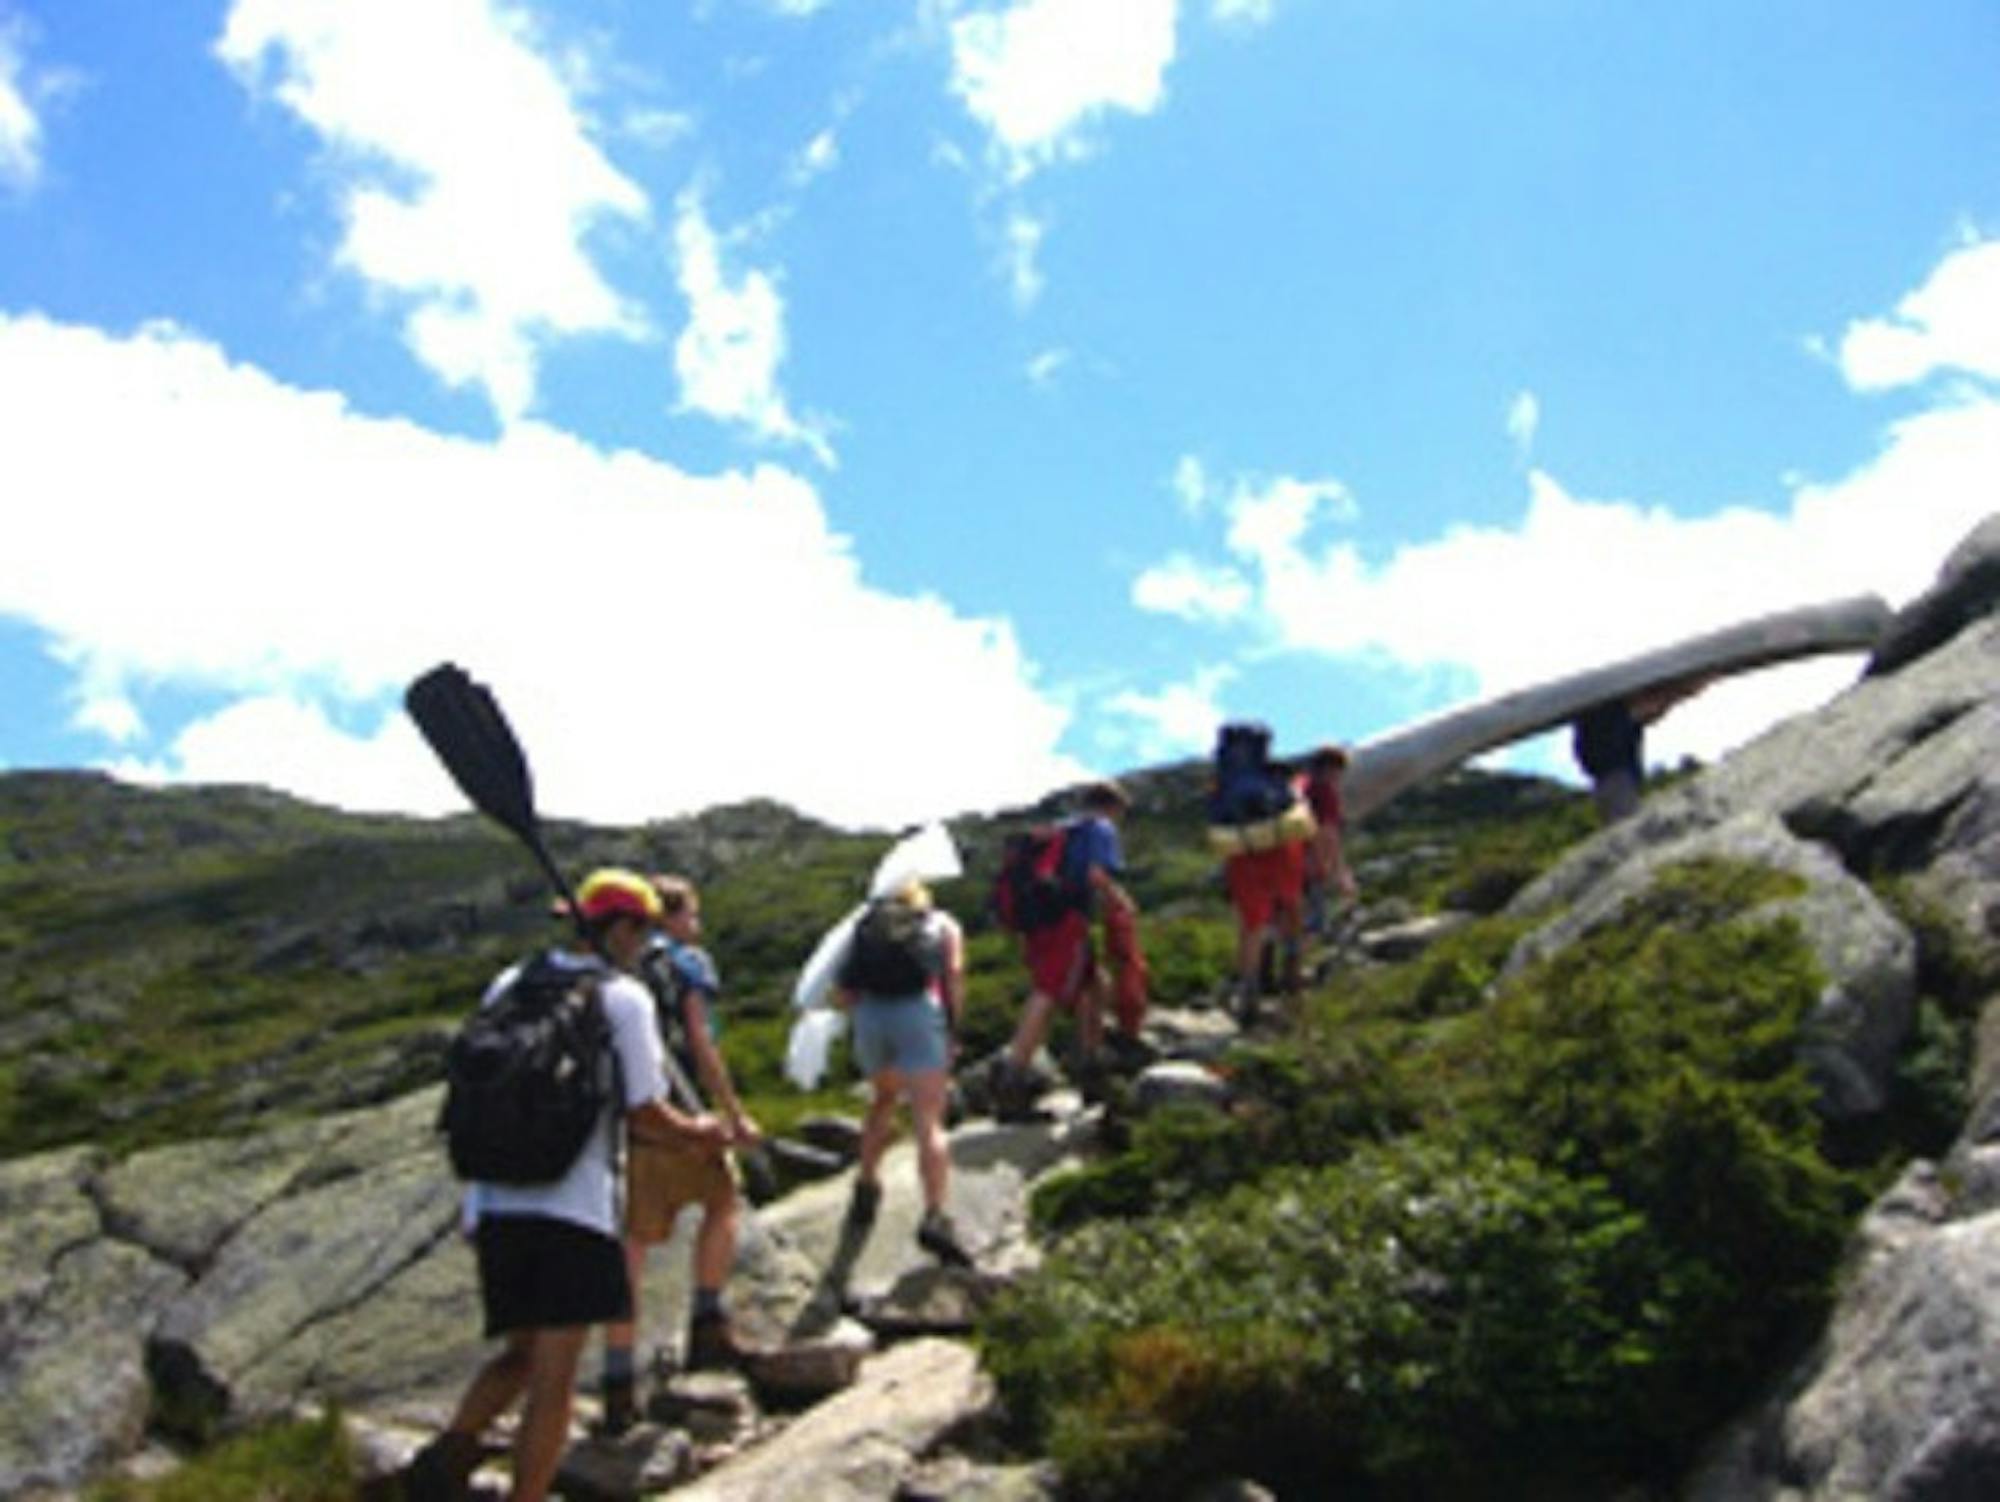 Undergraduates hike with a 40-pound aluminum canoe and a hand-made banner to the peak of Mount Washington.